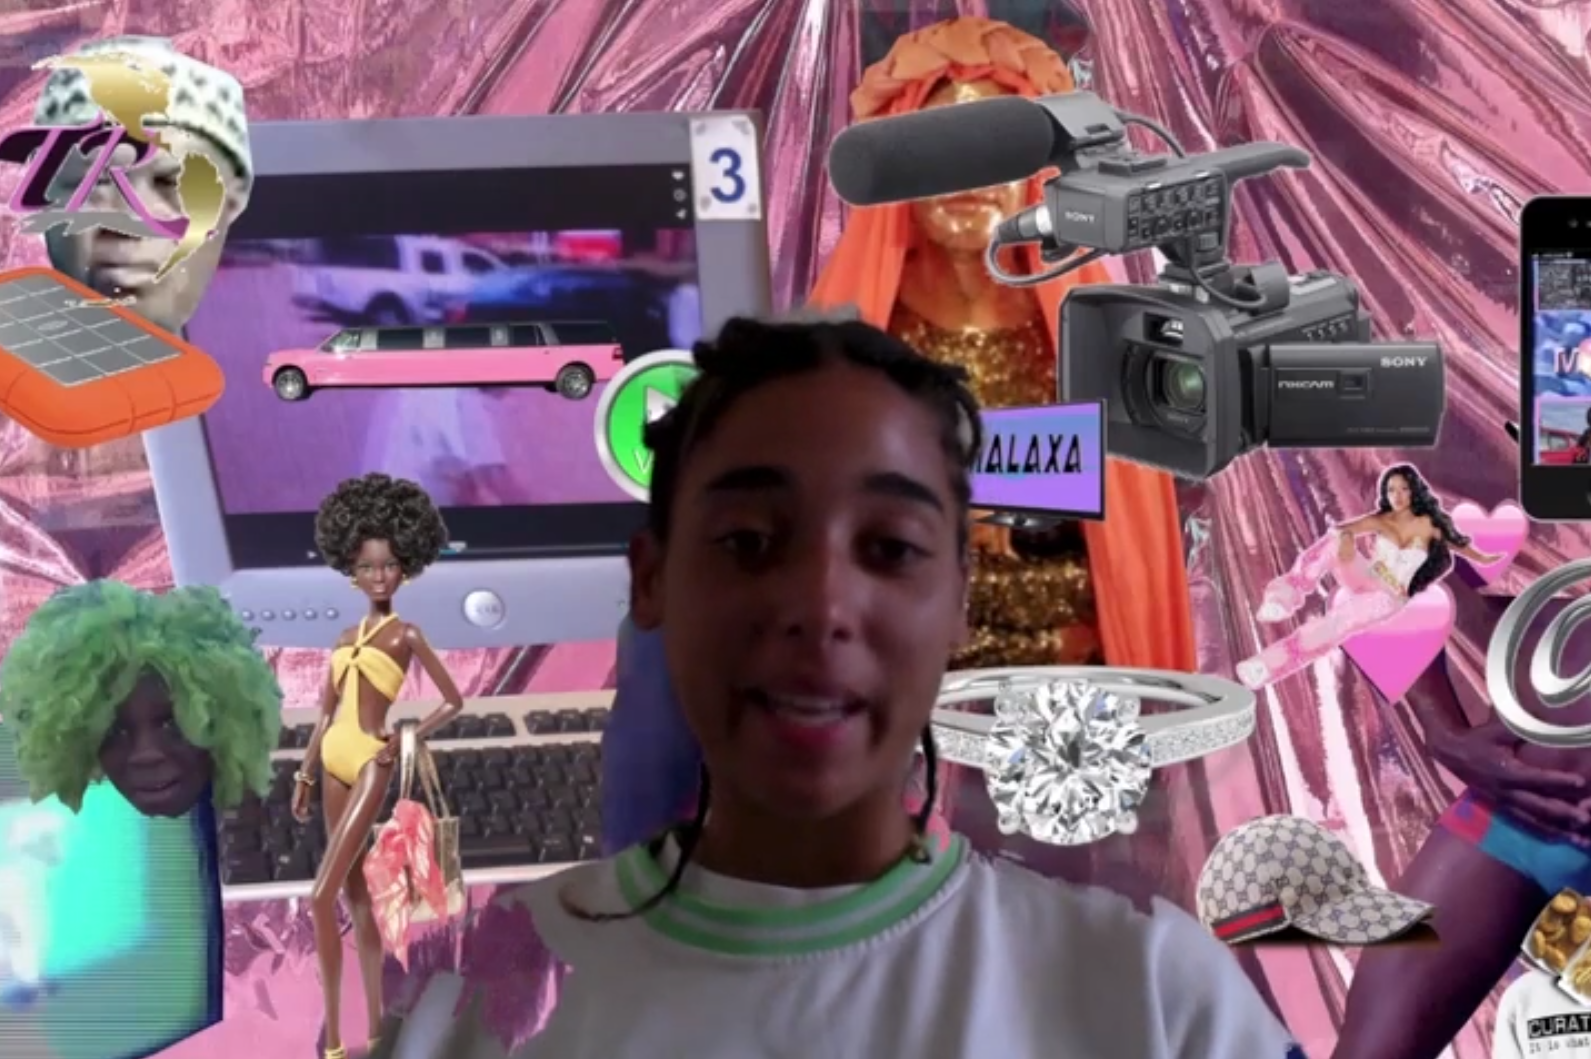 Video still of Tabita Rezaire in front of a collage of internet ephemera floating in front of a pink background